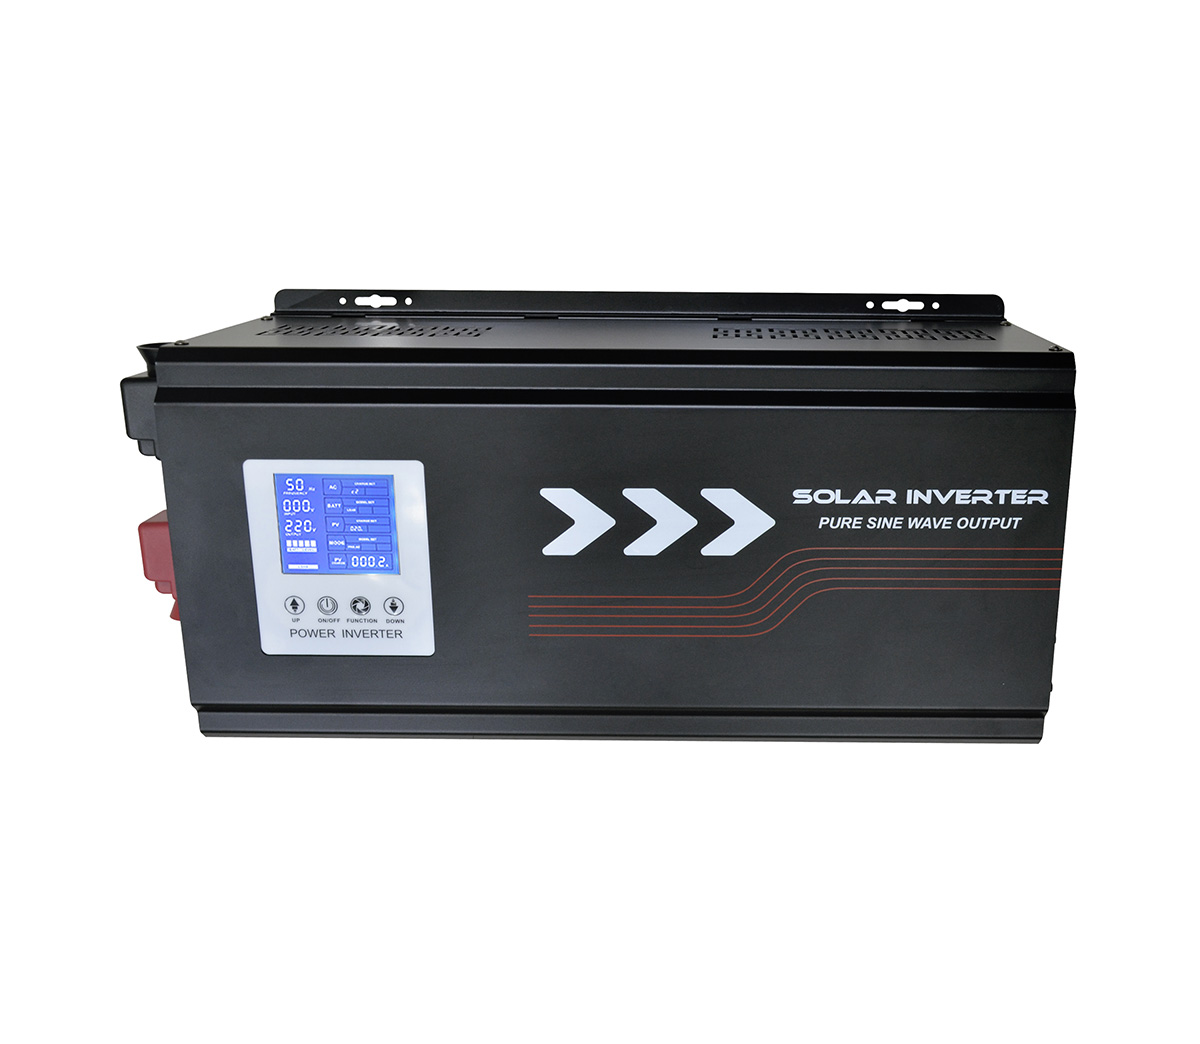 W10 Inverter Charger / Solar Inverter Charger (1000W-3000W)